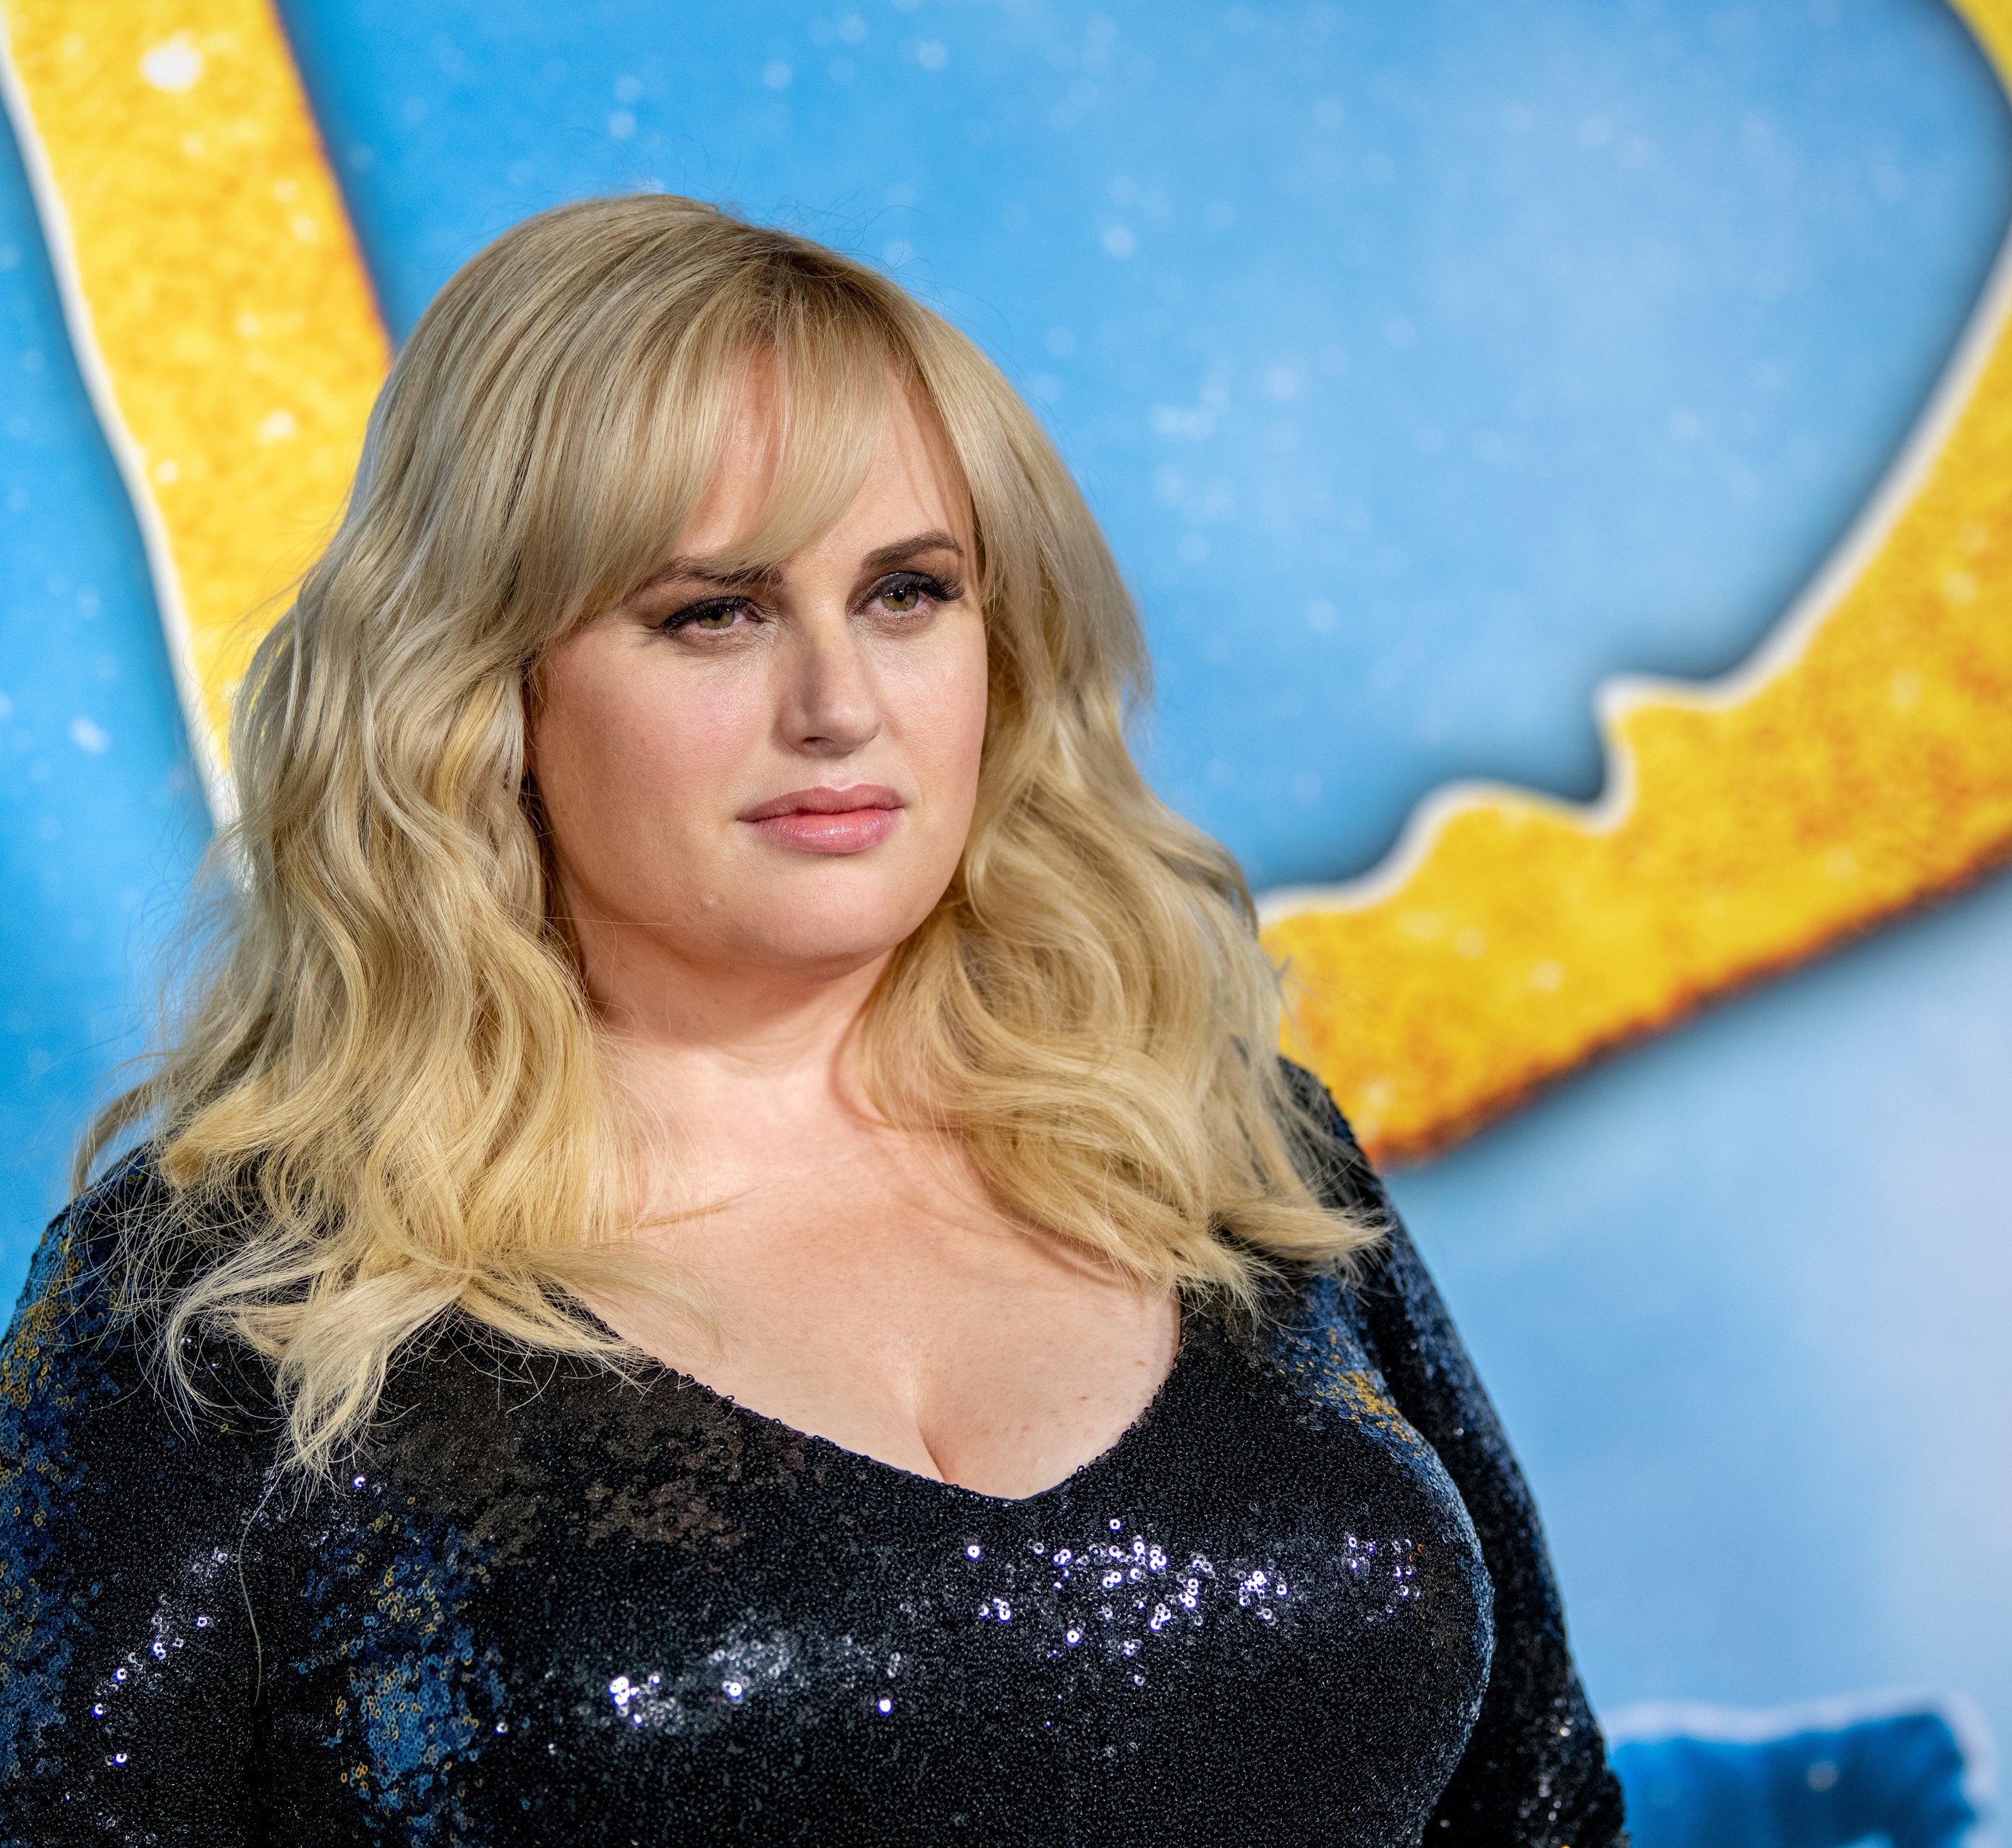 Rebel Wilson in a sequined outfit at a film event